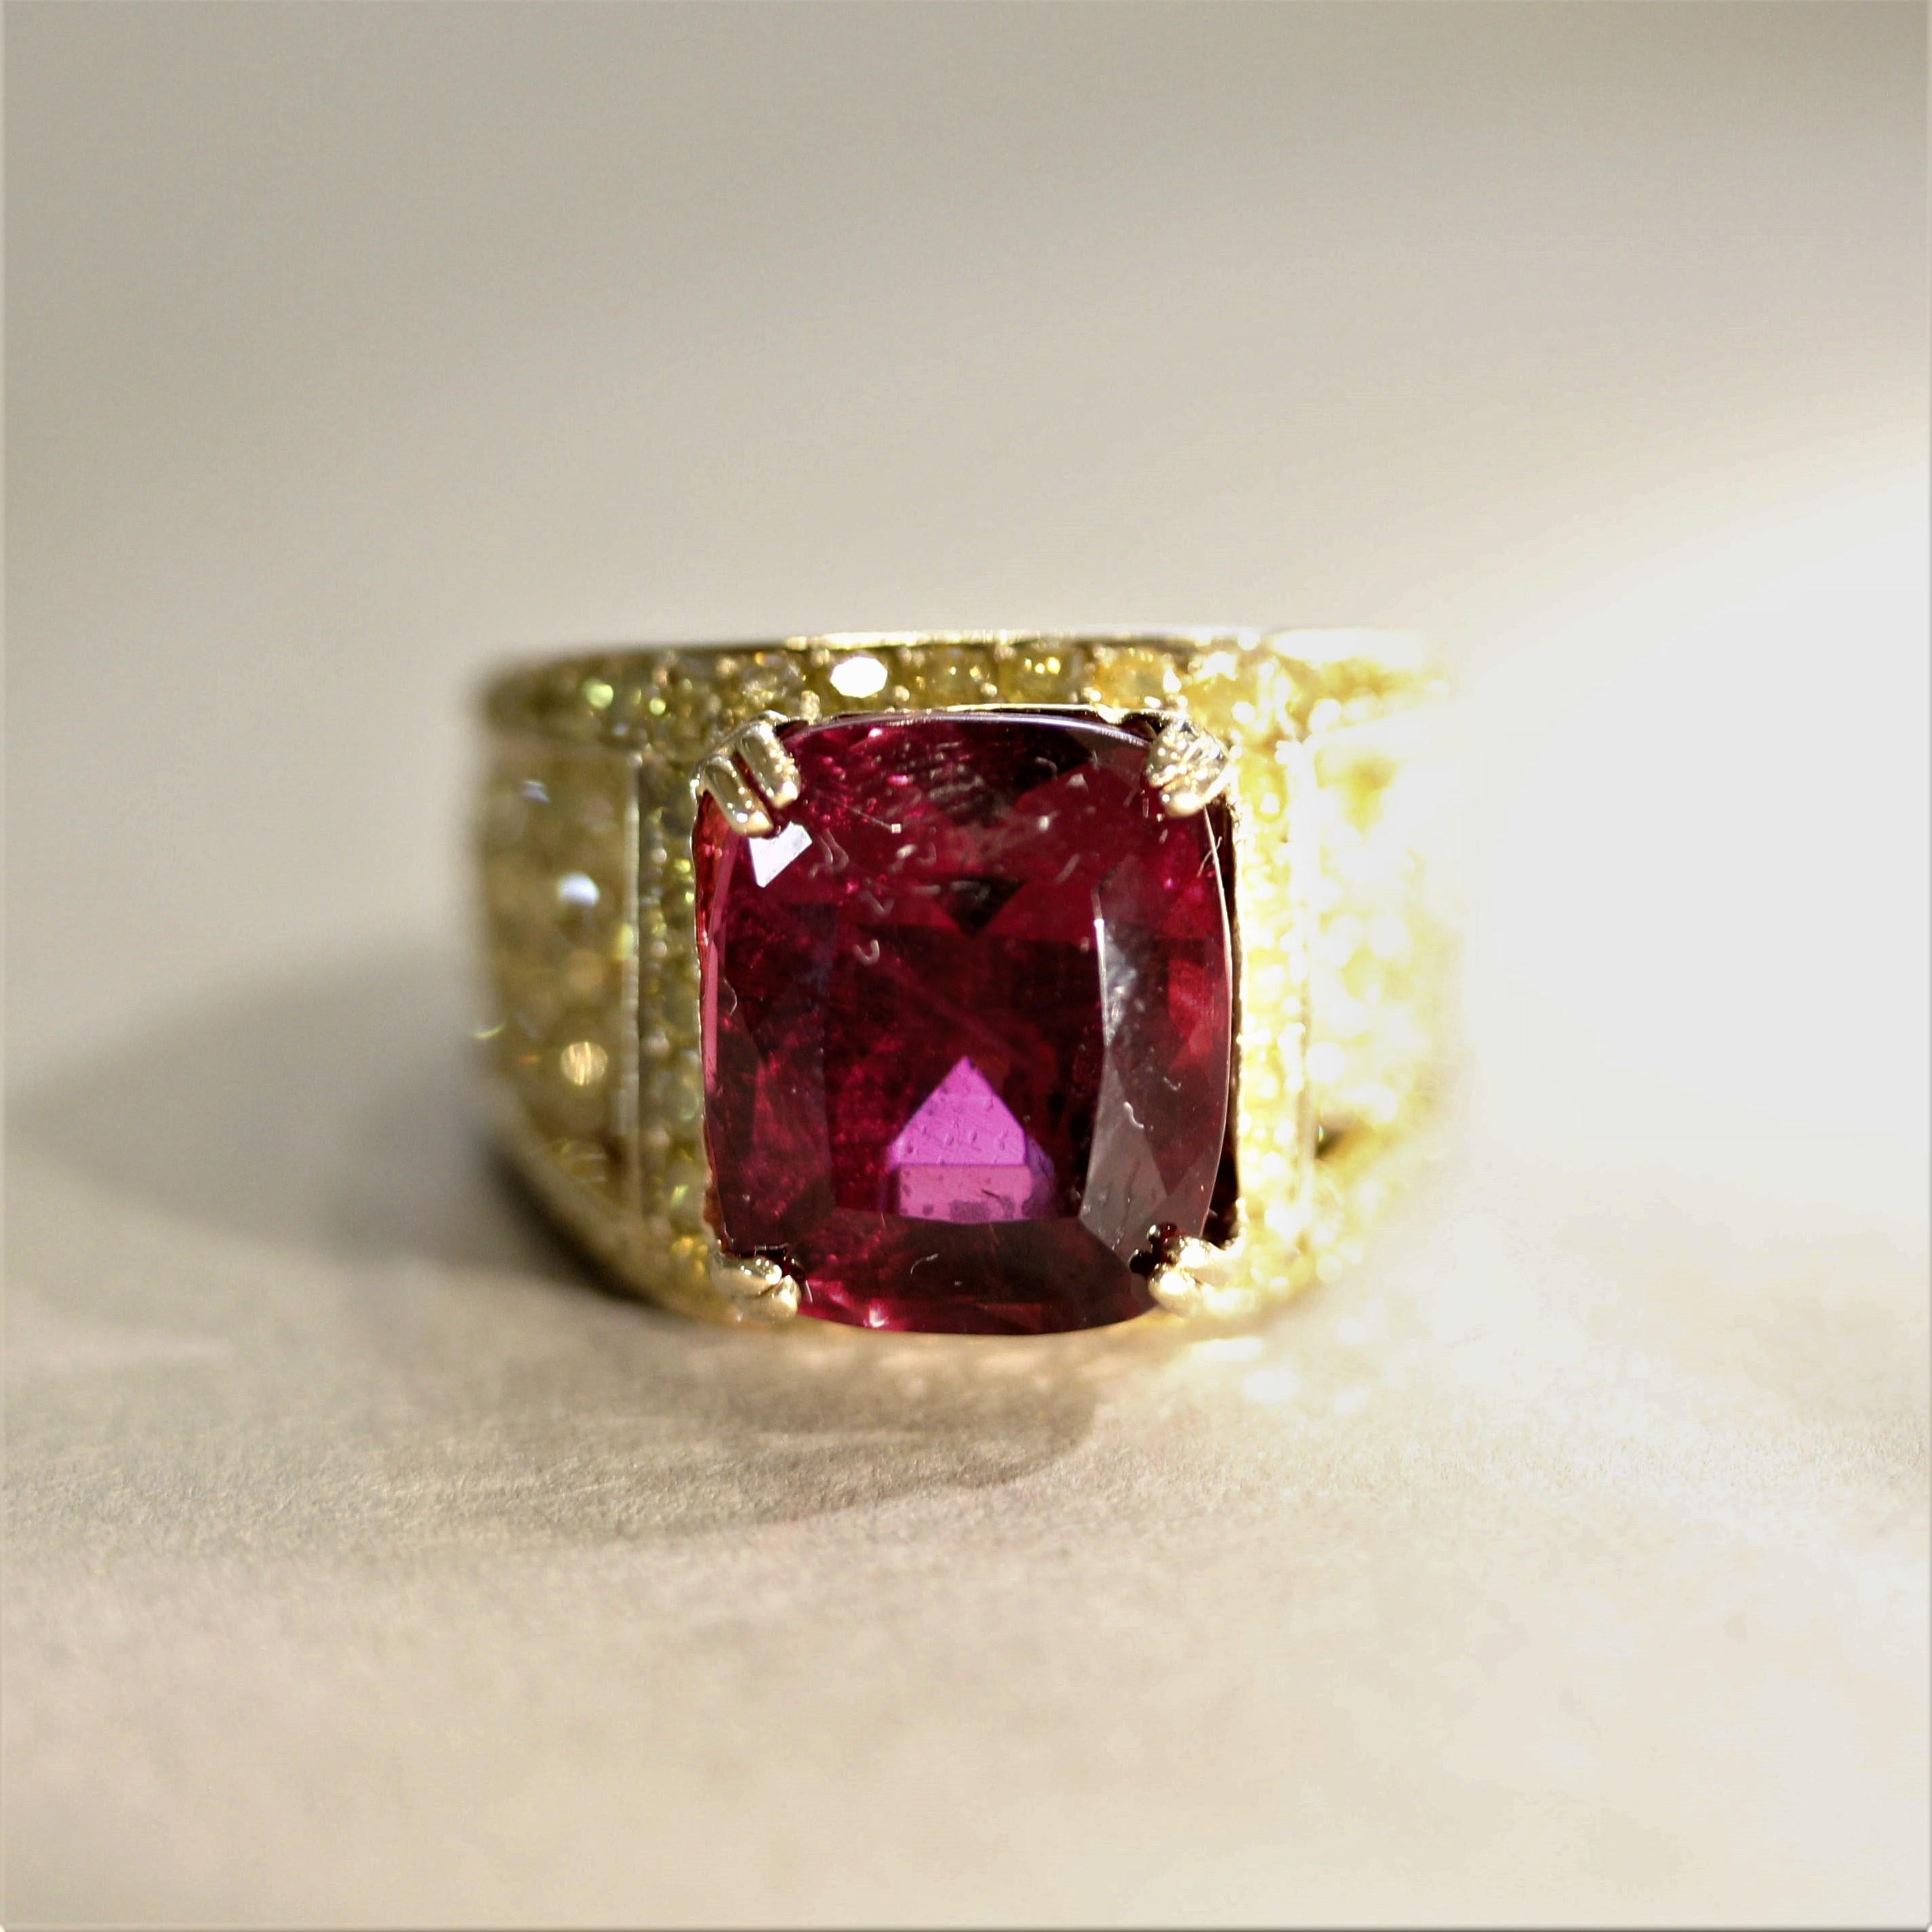 Simply mesmerizing! A superb top-quality rubellite tourmaline takes center stage. It weighs 9.43 carats and has an intense vivid red color that rivals any other rubellite on the market. It is set in a 18k yellow gold ring that is pave-set with 5.88